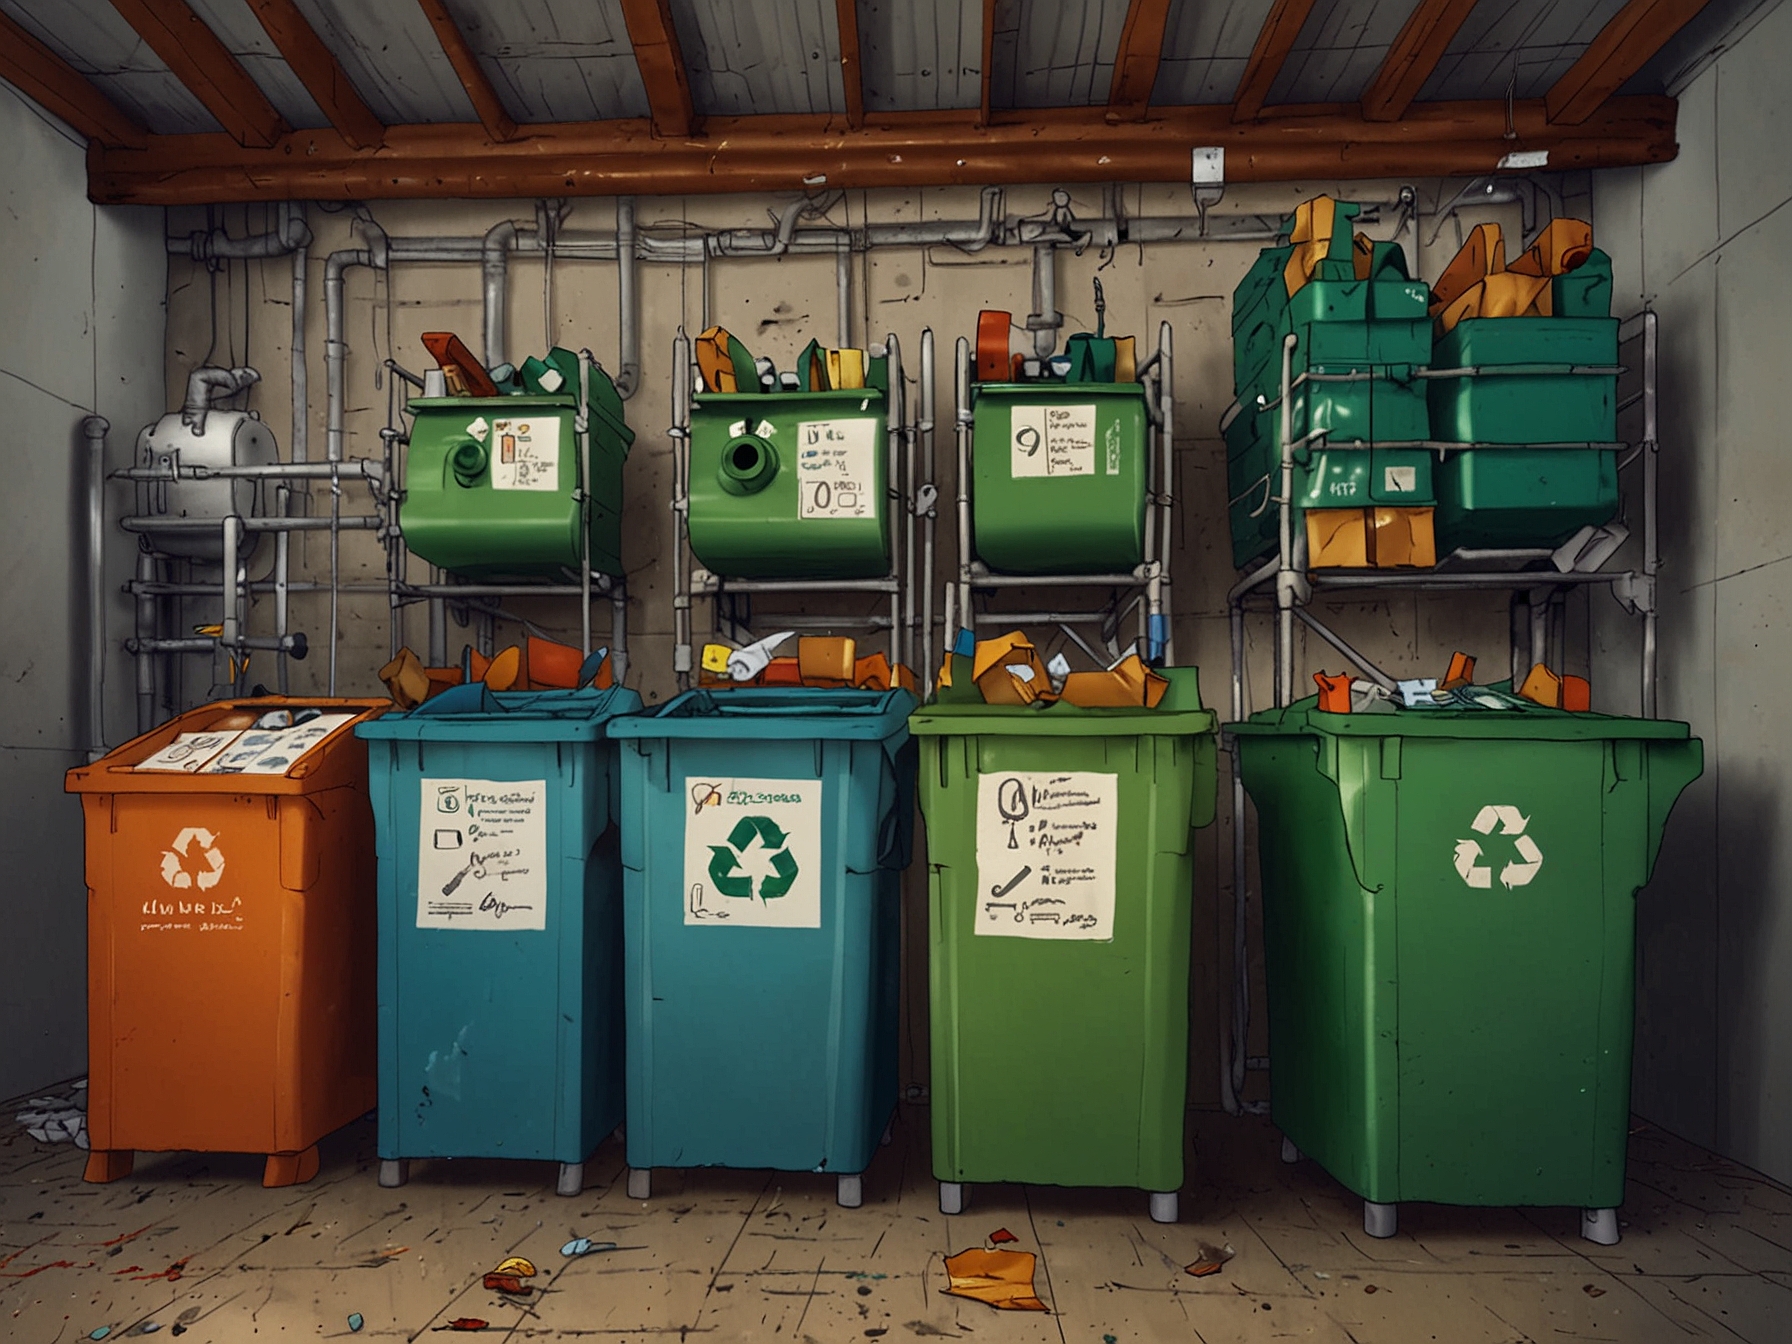 A diagram depicting the recycling process from consumer sorting, waste collection, processing at recycling facilities, to manufacturers using recycled materials to create new products, showcasing potential points of failure and solutions.